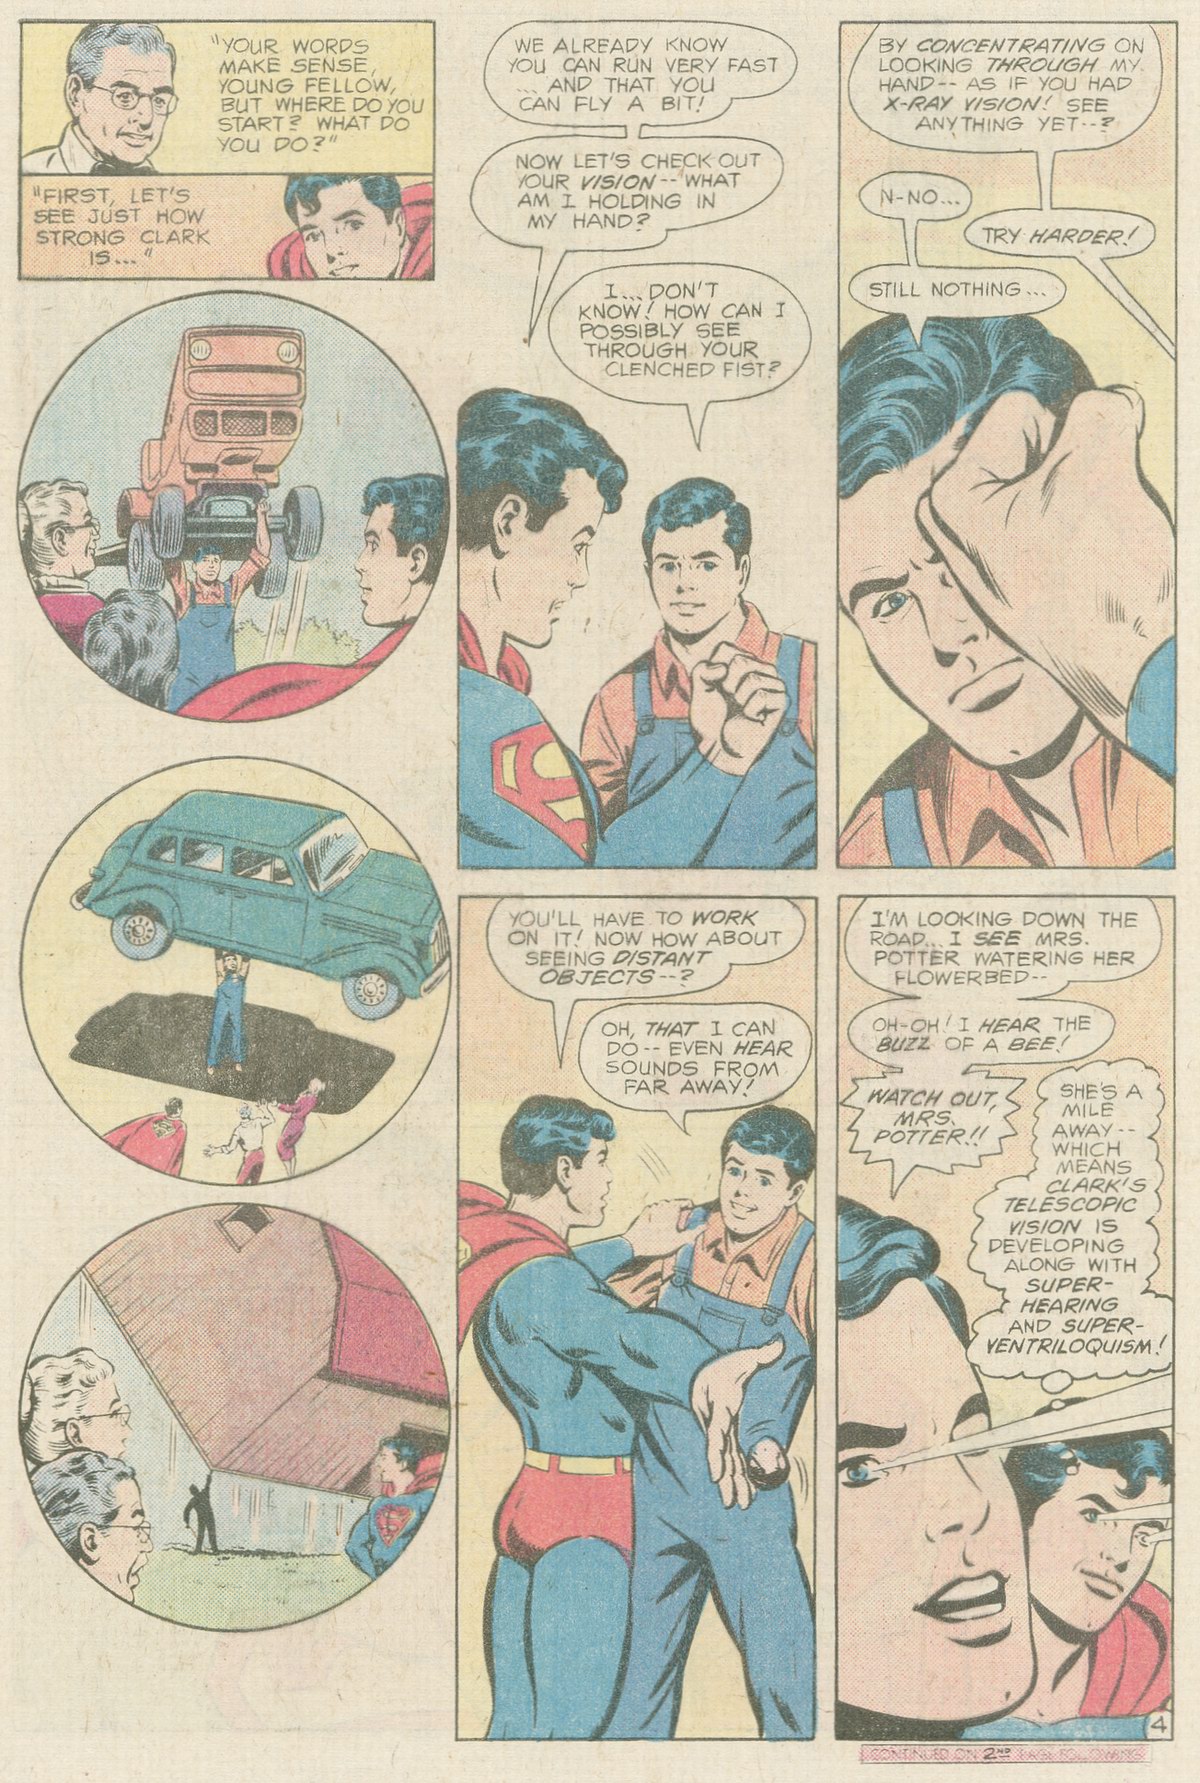 The New Adventures of Superboy 16 Page 21